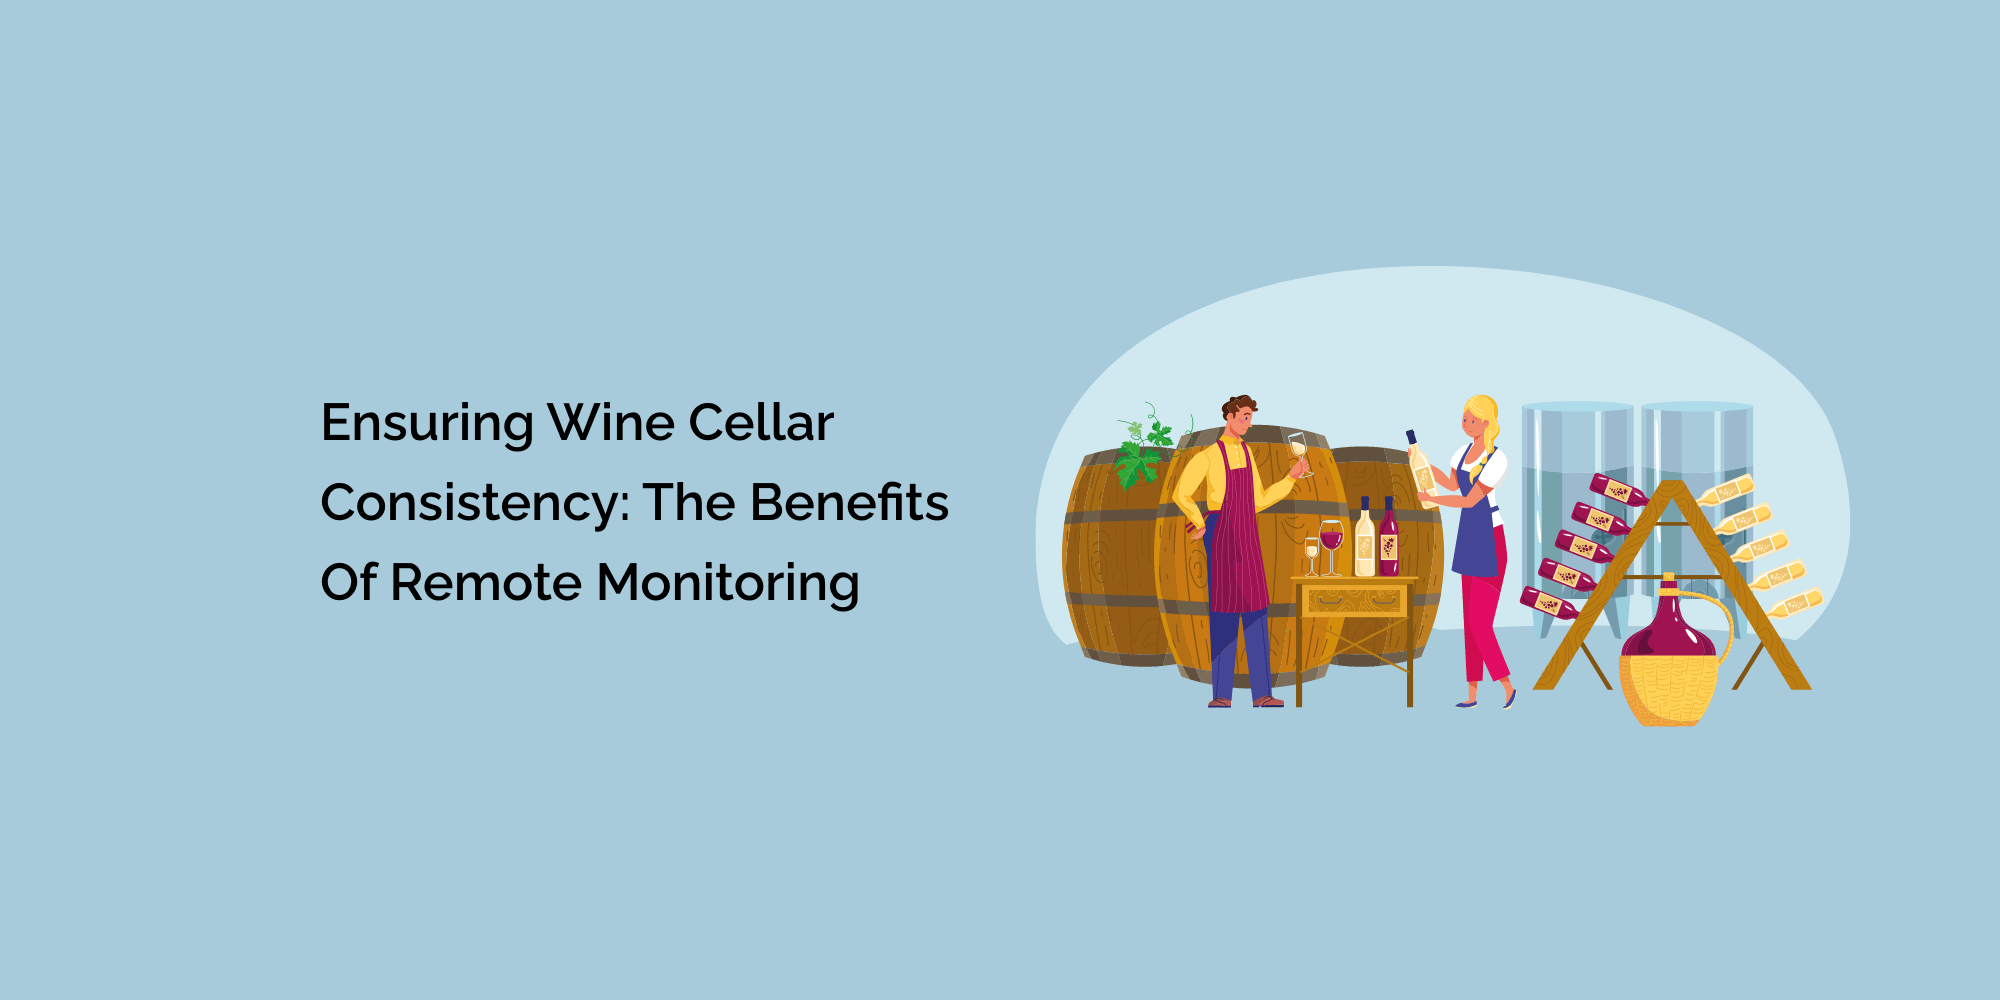 Ensuring Wine Cellar Consistency: The Benefits of Remote Monitoring